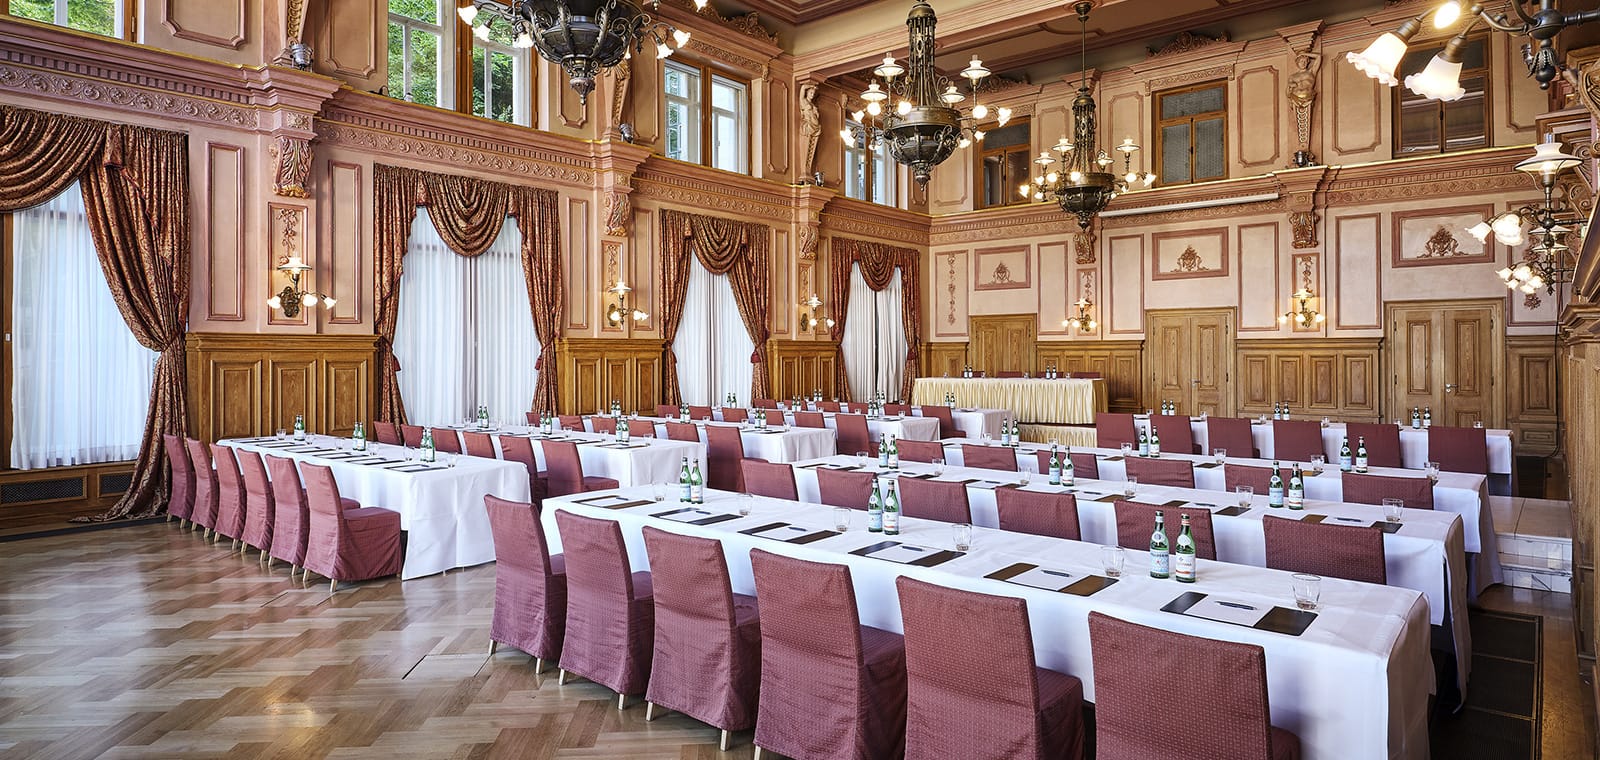 The impressive painter's hall with many tables and chairs in the event location in Baden Baden